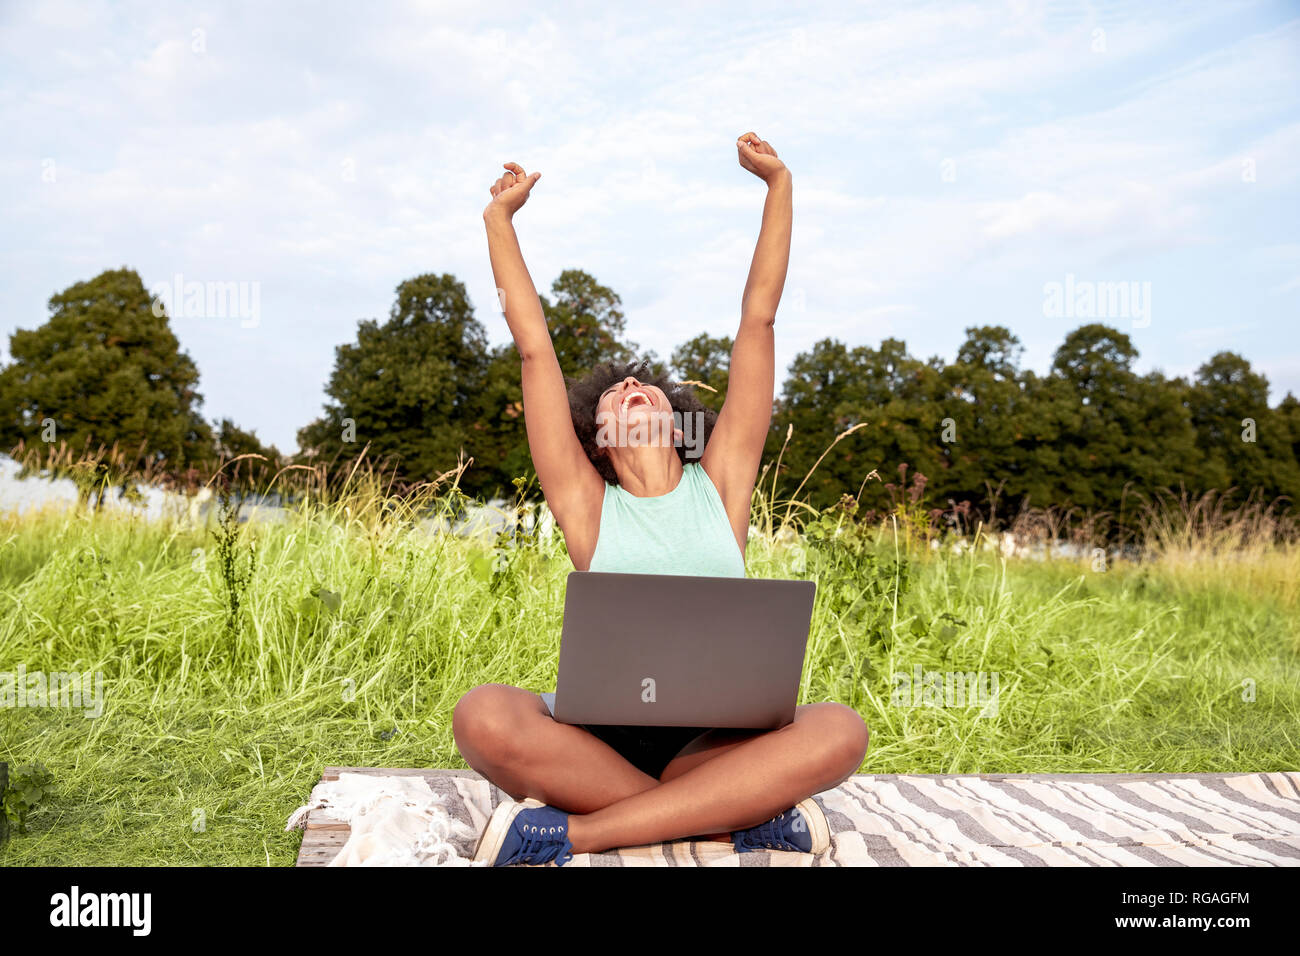 Cheering woman sitting in a meadow using laptop Banque D'Images